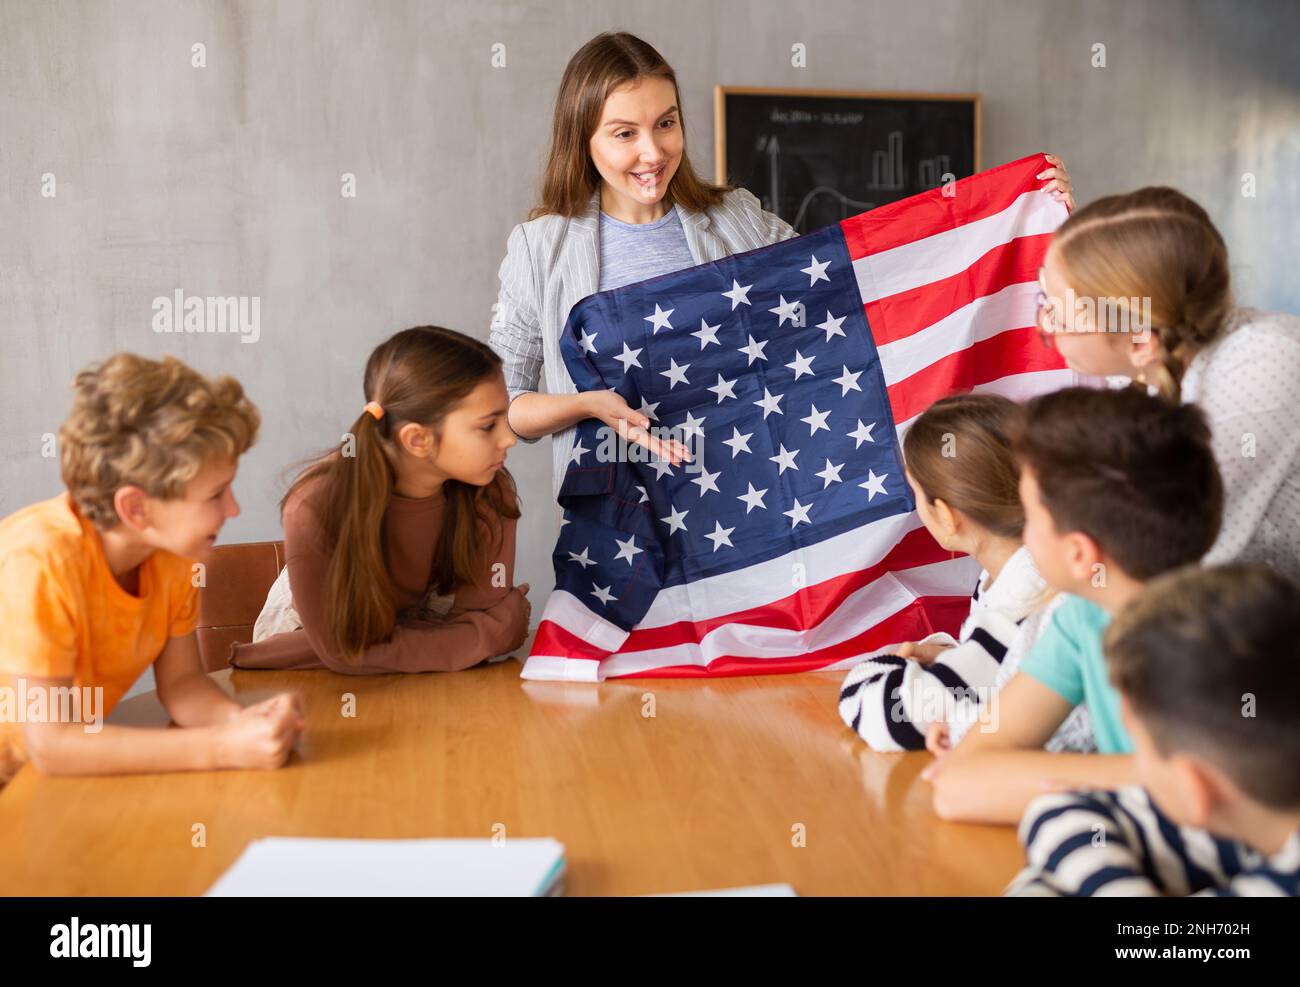 Geography lesson in school class - teacher talks about United States of America, holding flag in his hands Stock Photo